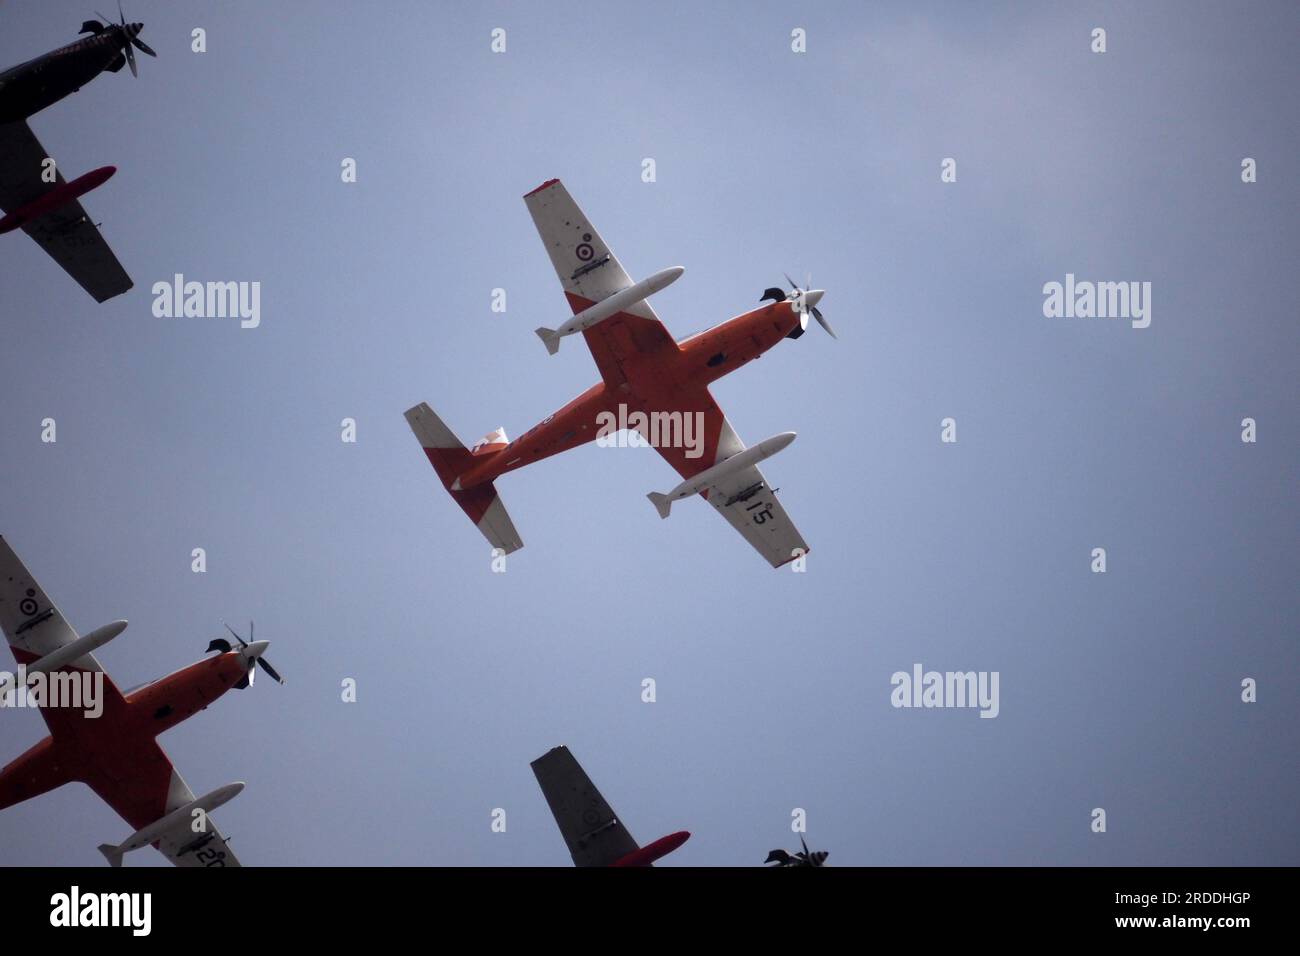 Korean KAI KT-1 Woongbi aircraft of the Peruvian Air Force fly over the sky of Lima rehearsing for the upcoming Peruvian Independence Day military parade that will take place on July 29th Stock Photo